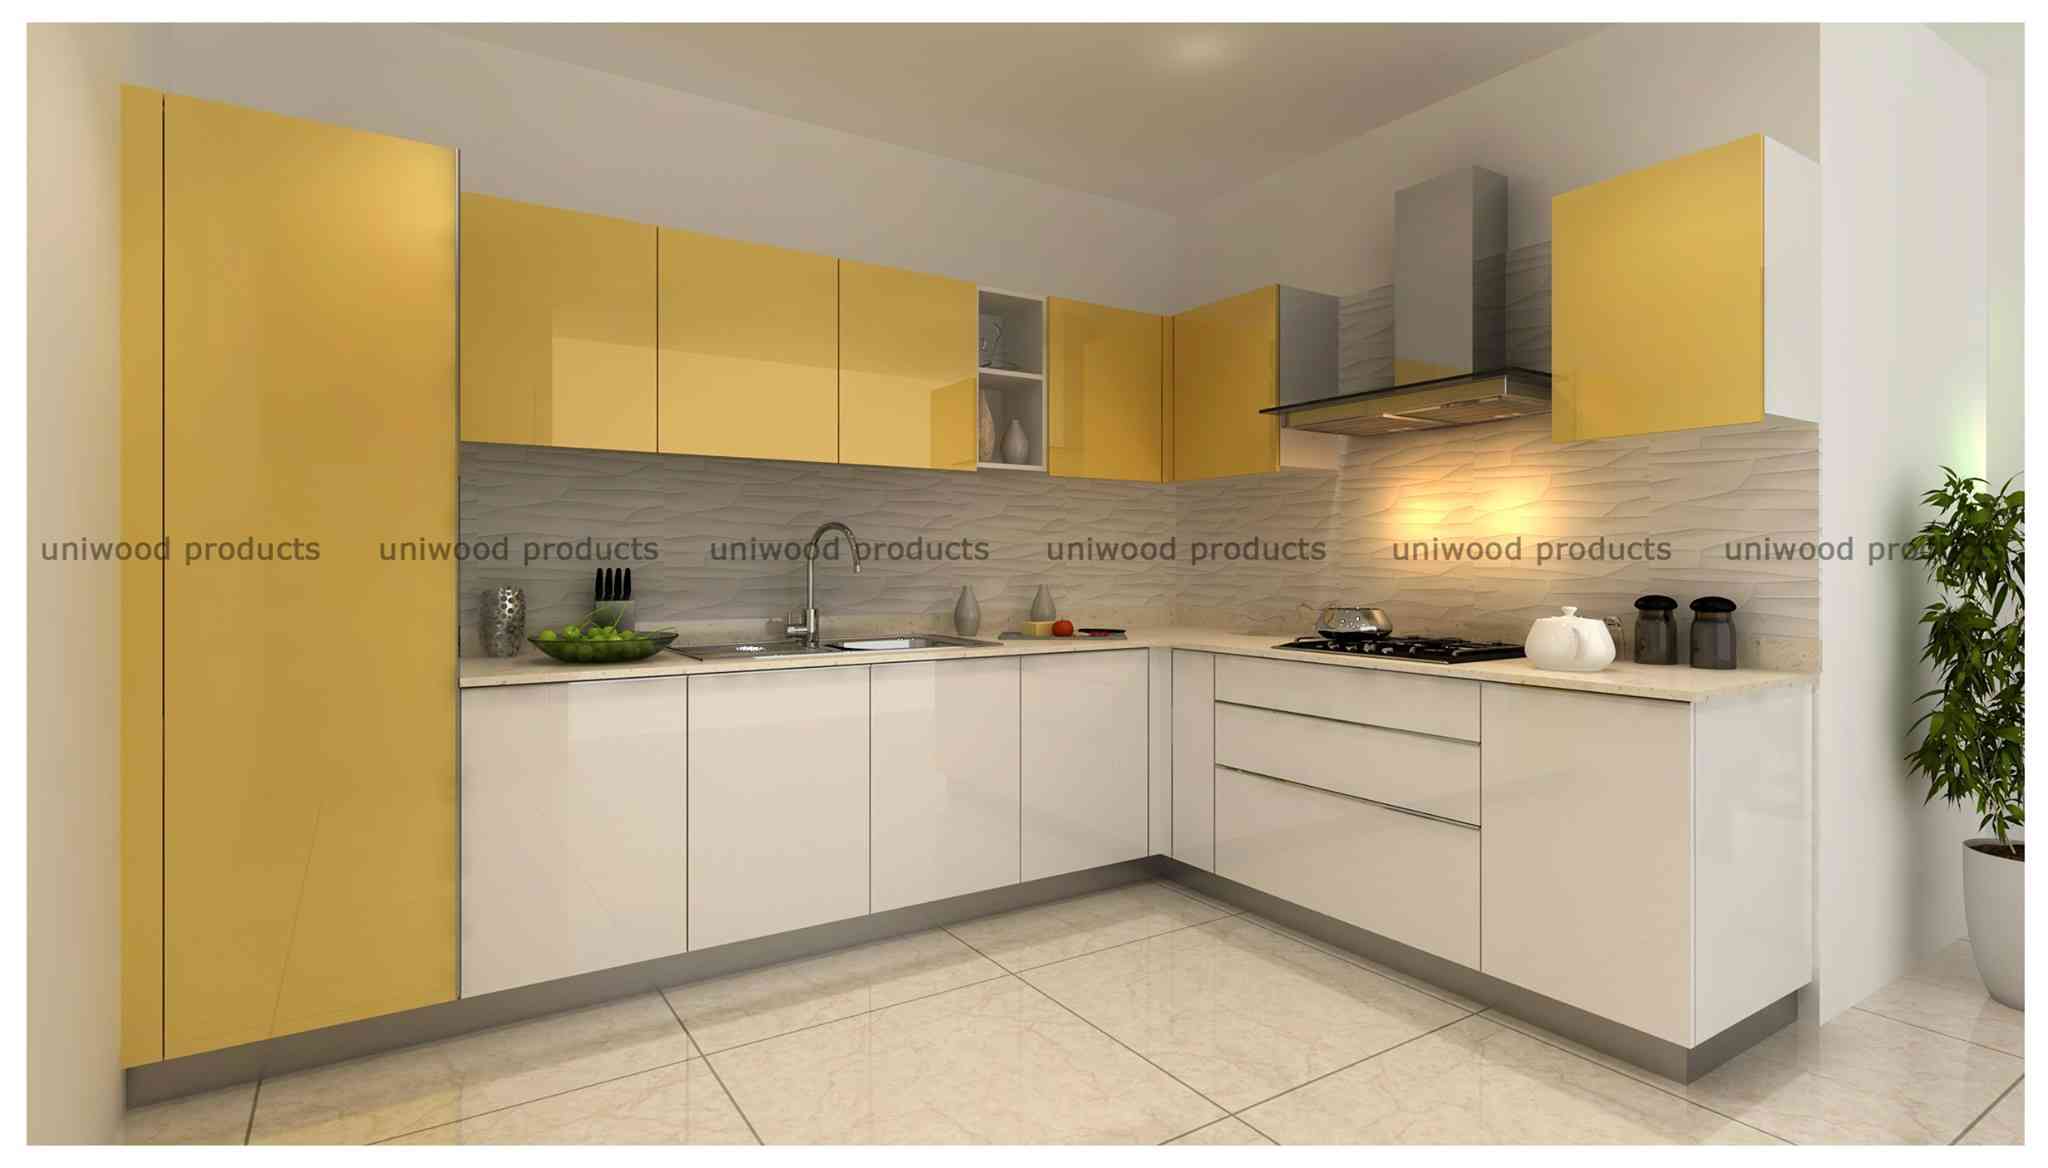 Modular L-Shaped Kitchen With Yellow and Off-White Cabinets